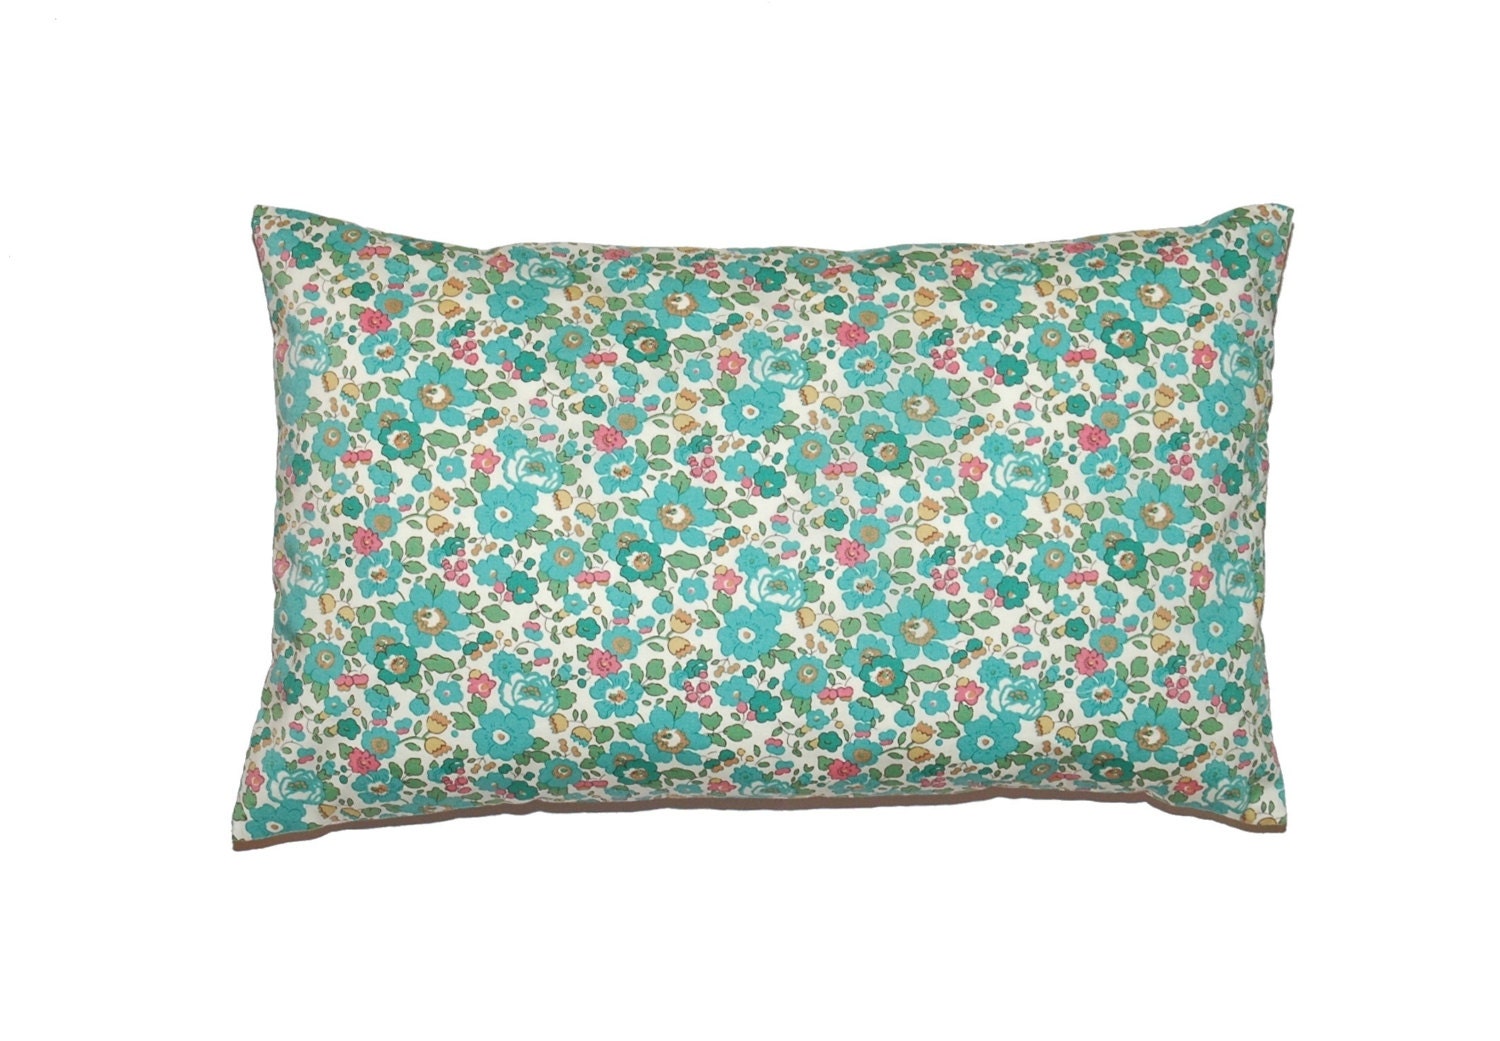 Turquoise Floral Betsy Liberty of London Print Throw Pillow Cover 12"x20" - More Sizes and Colors Avalaible - gGlinParis